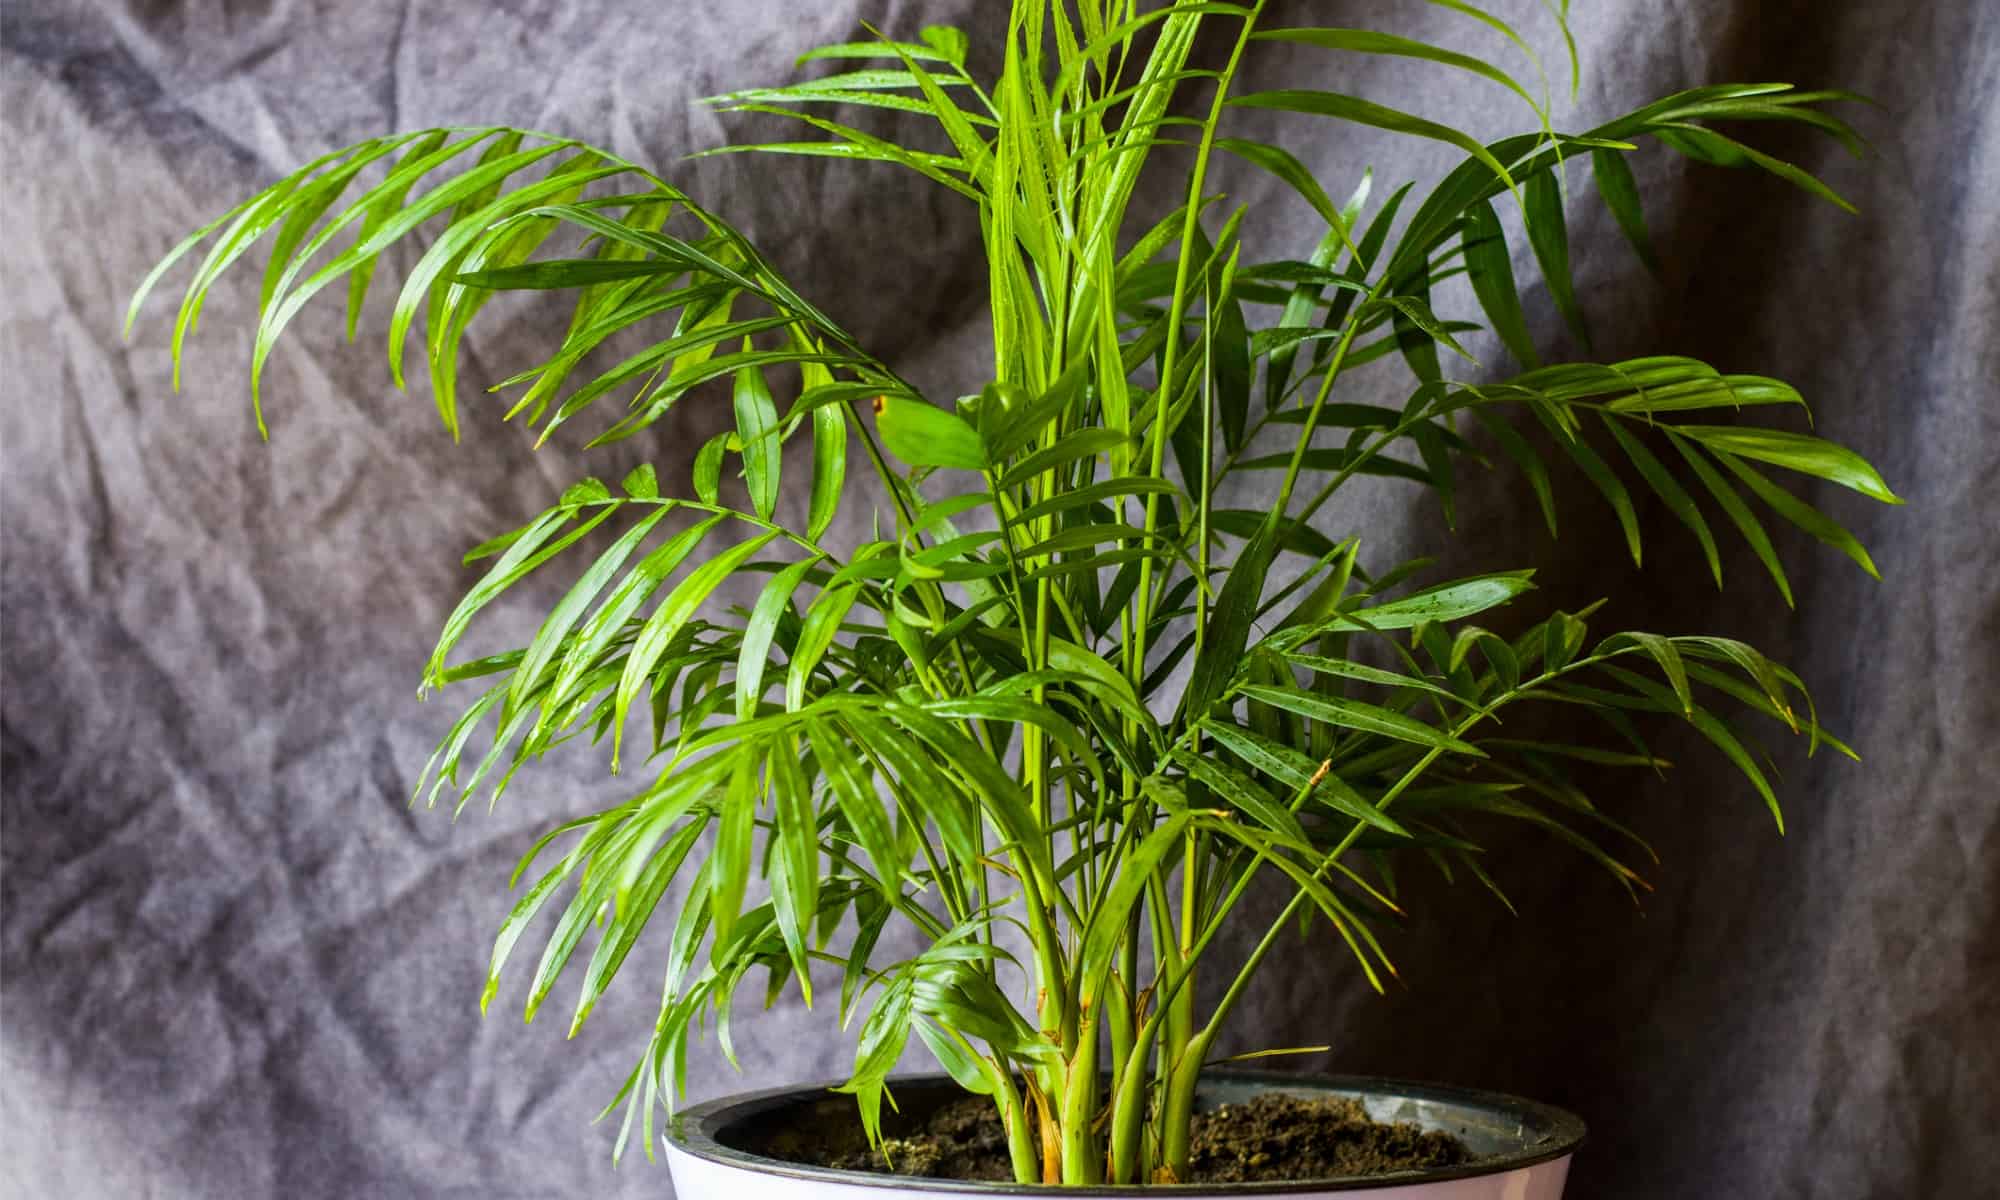 Royal Palm Tree - Varieties, How to Propagate and More - A-Z Animals